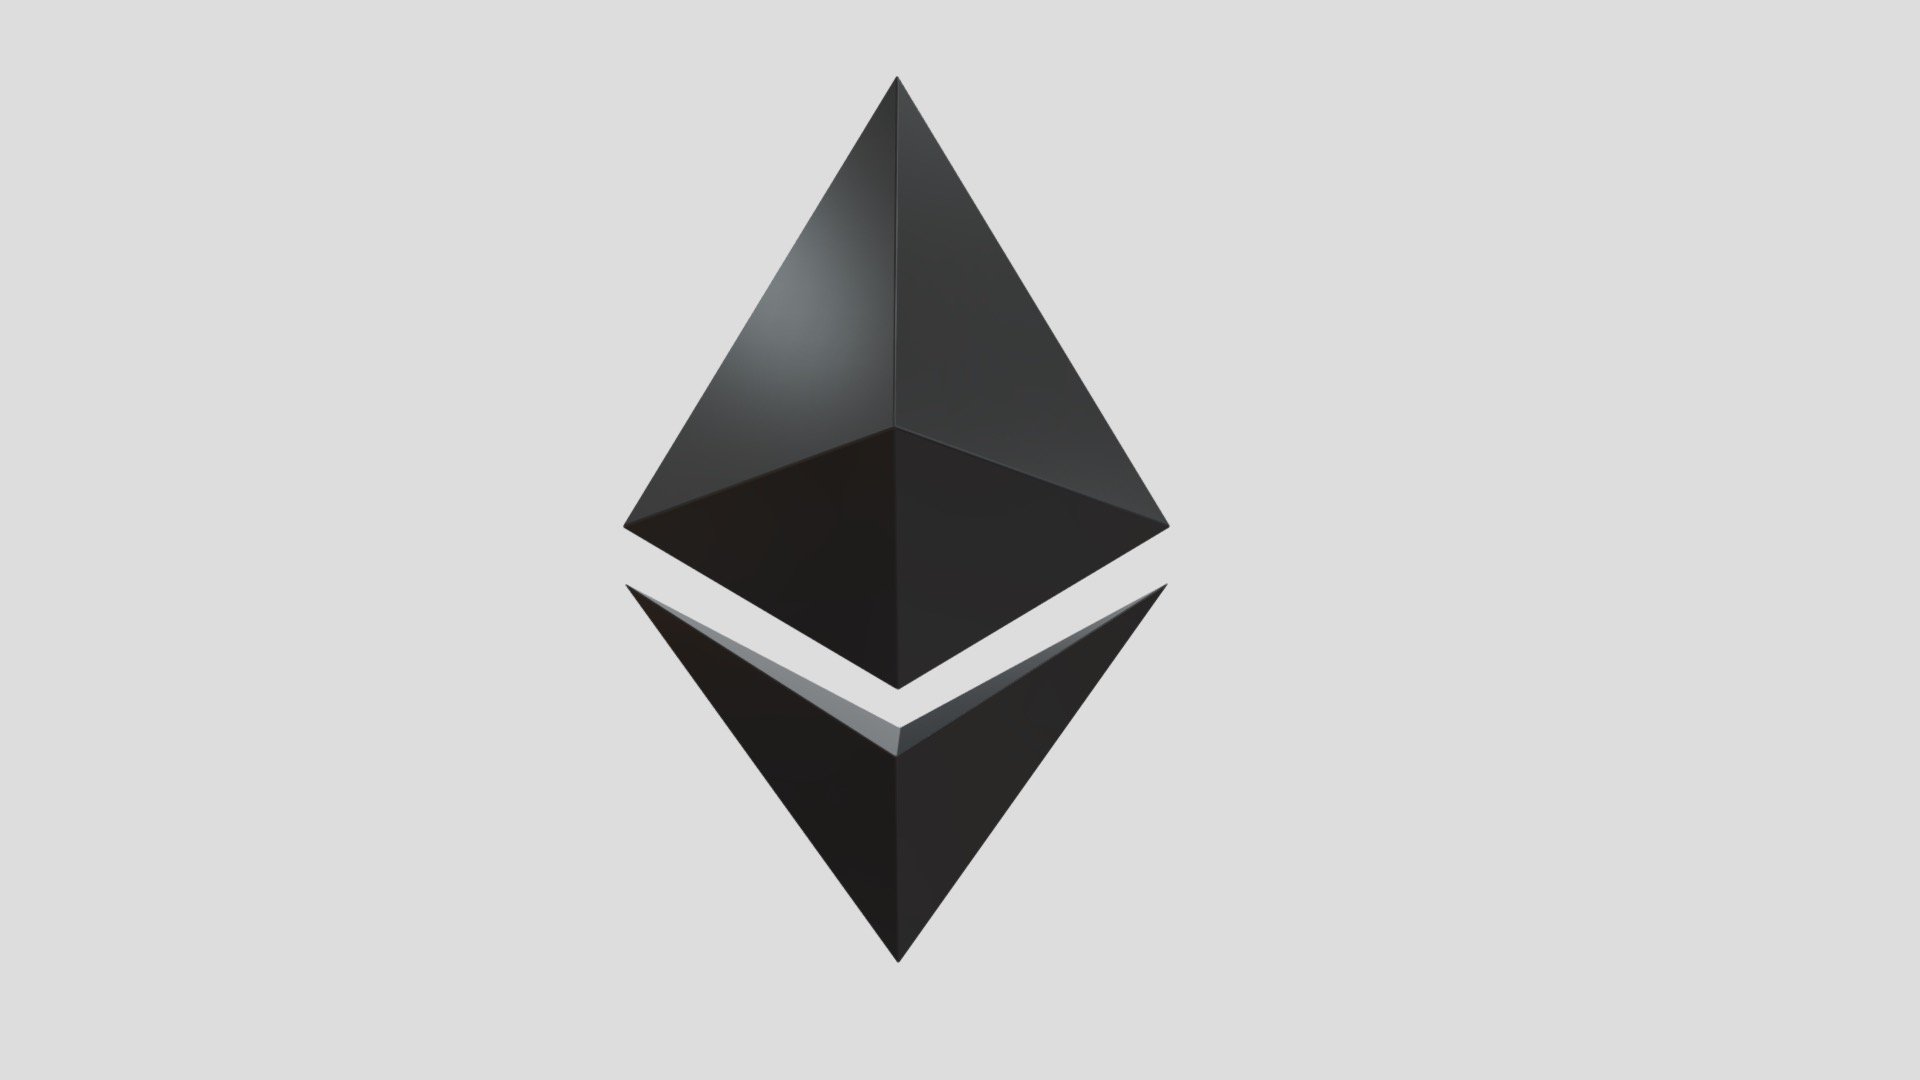 This is the official Ethereum logo in 3D 3d model